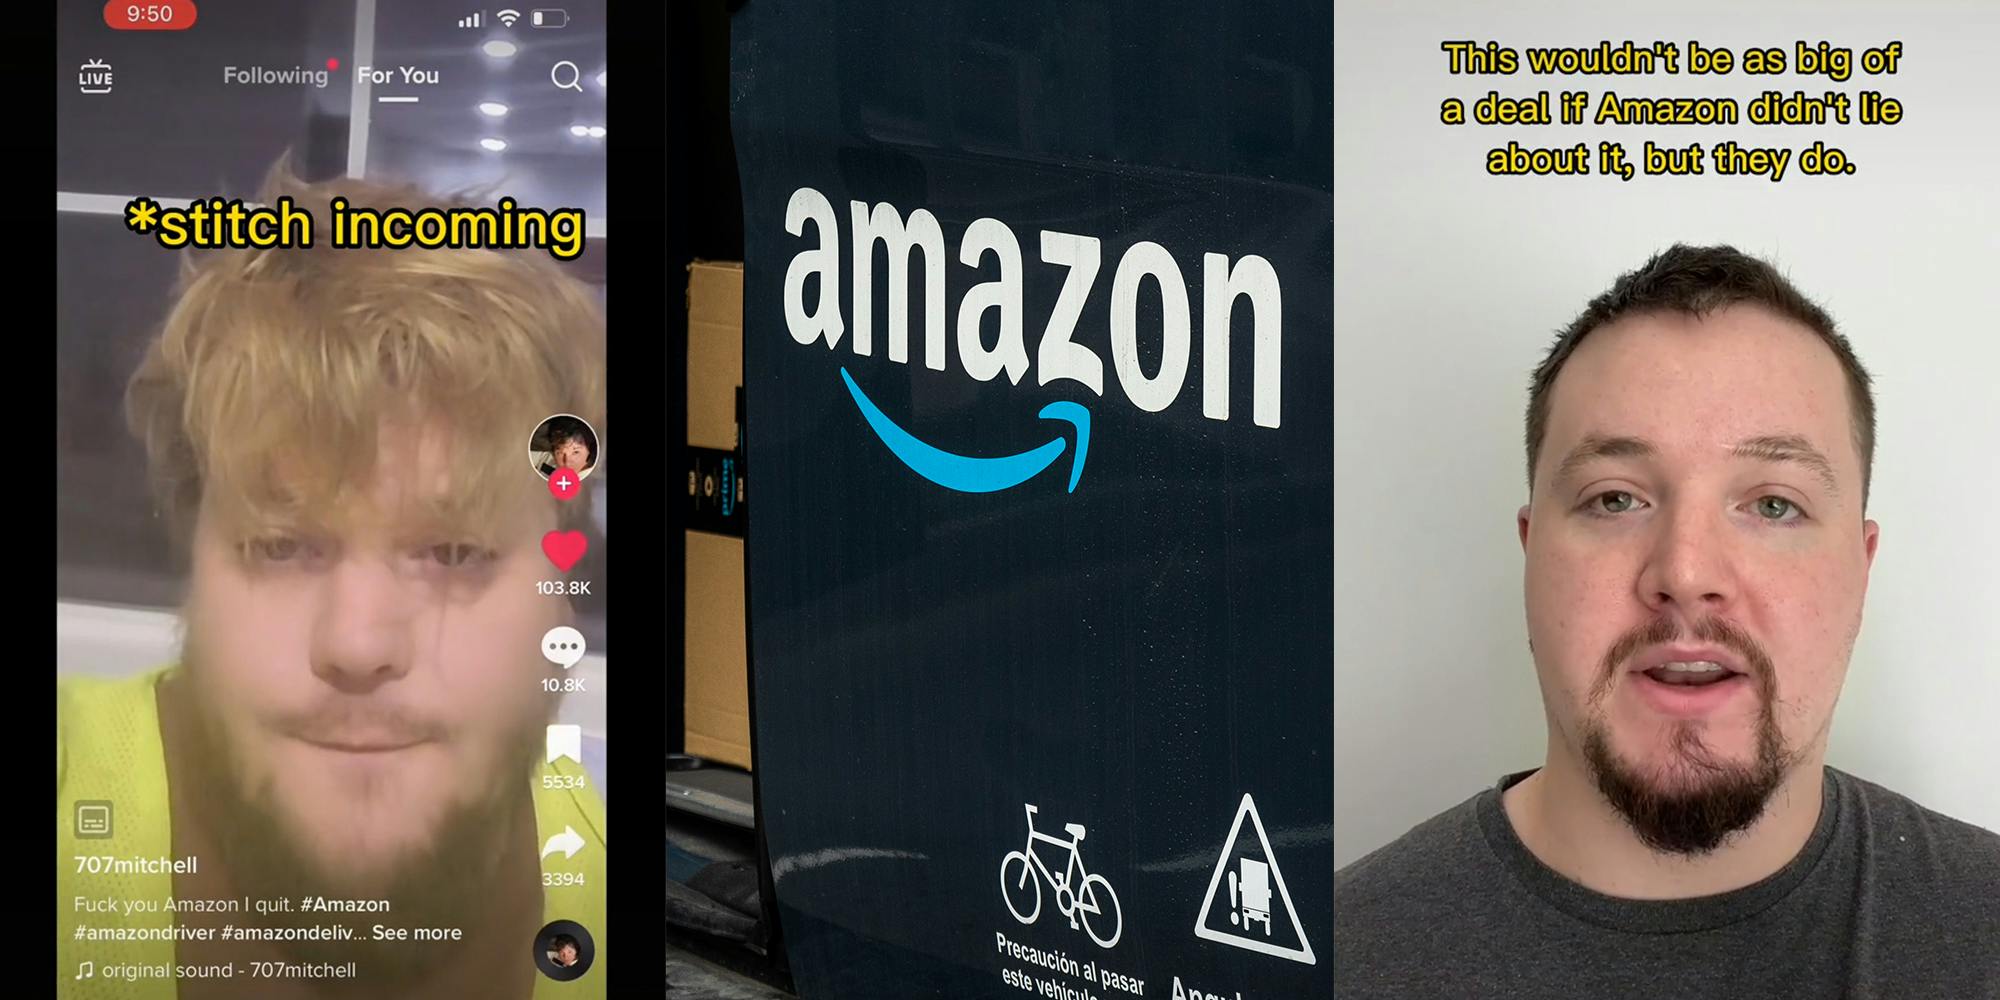 amazon driver (l) amazon prime van (c) man in room with caption "this wouldn't be as big of a deal if Amazon didn't lie about it, but they do." (r)